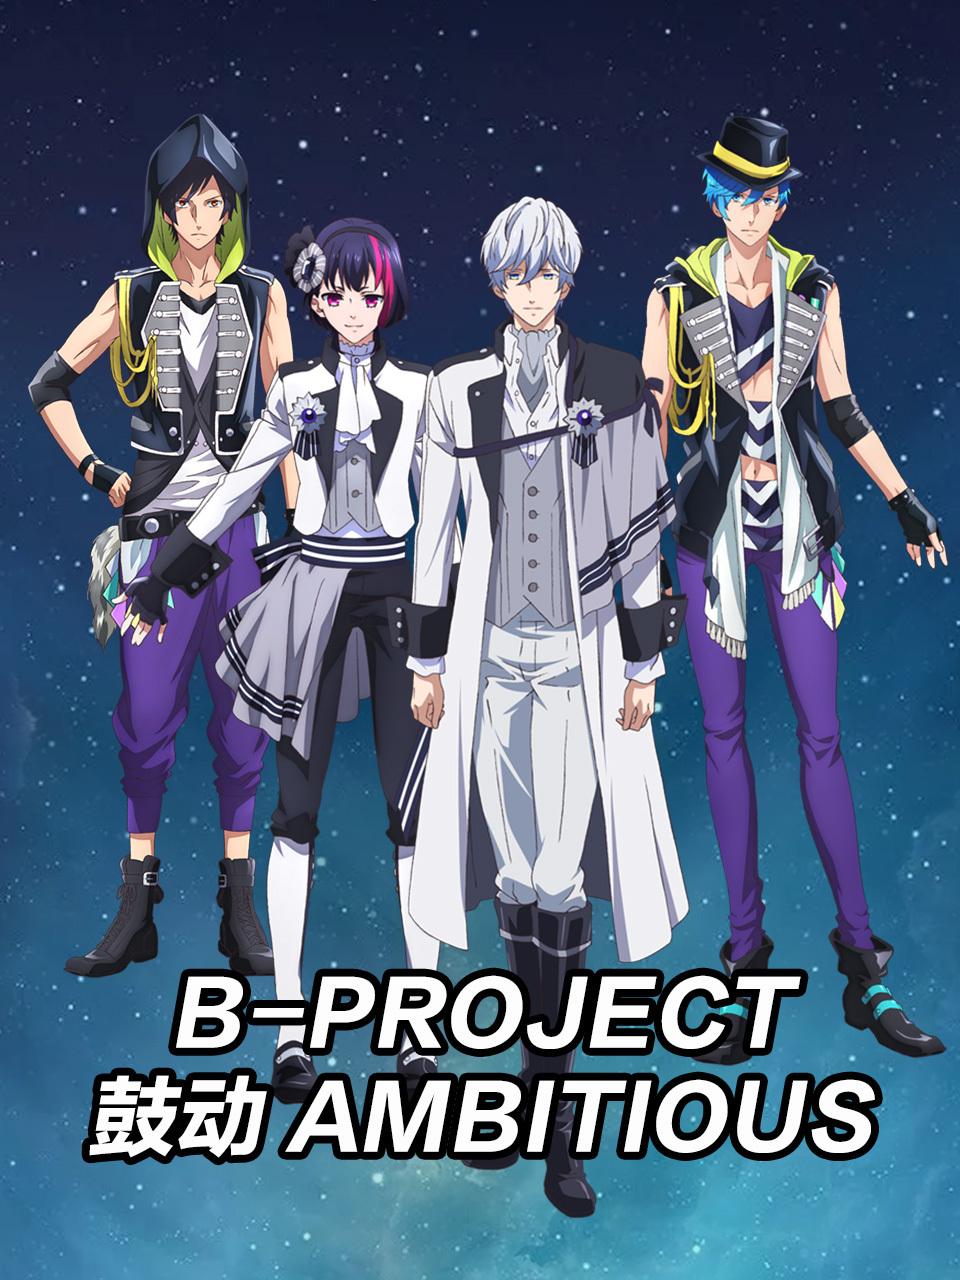 B-PROJECT鼓动Ambitious